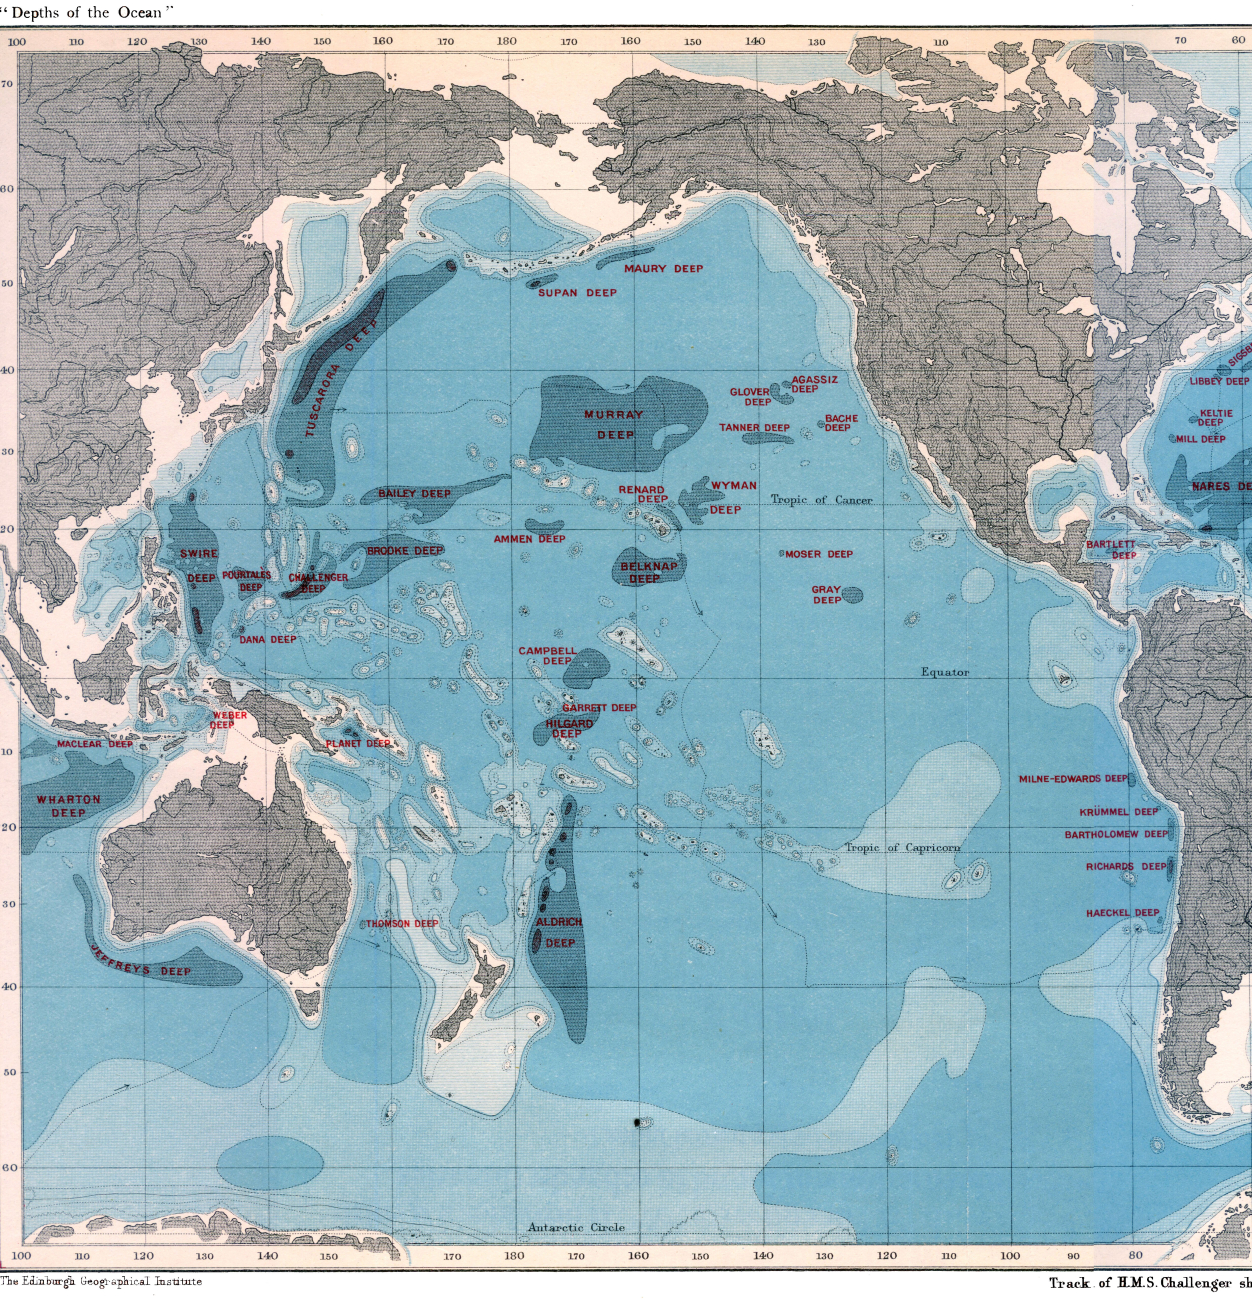 Bathymetrical Chart of the Oceans Showing theDeeps According to Sir JohnMurray